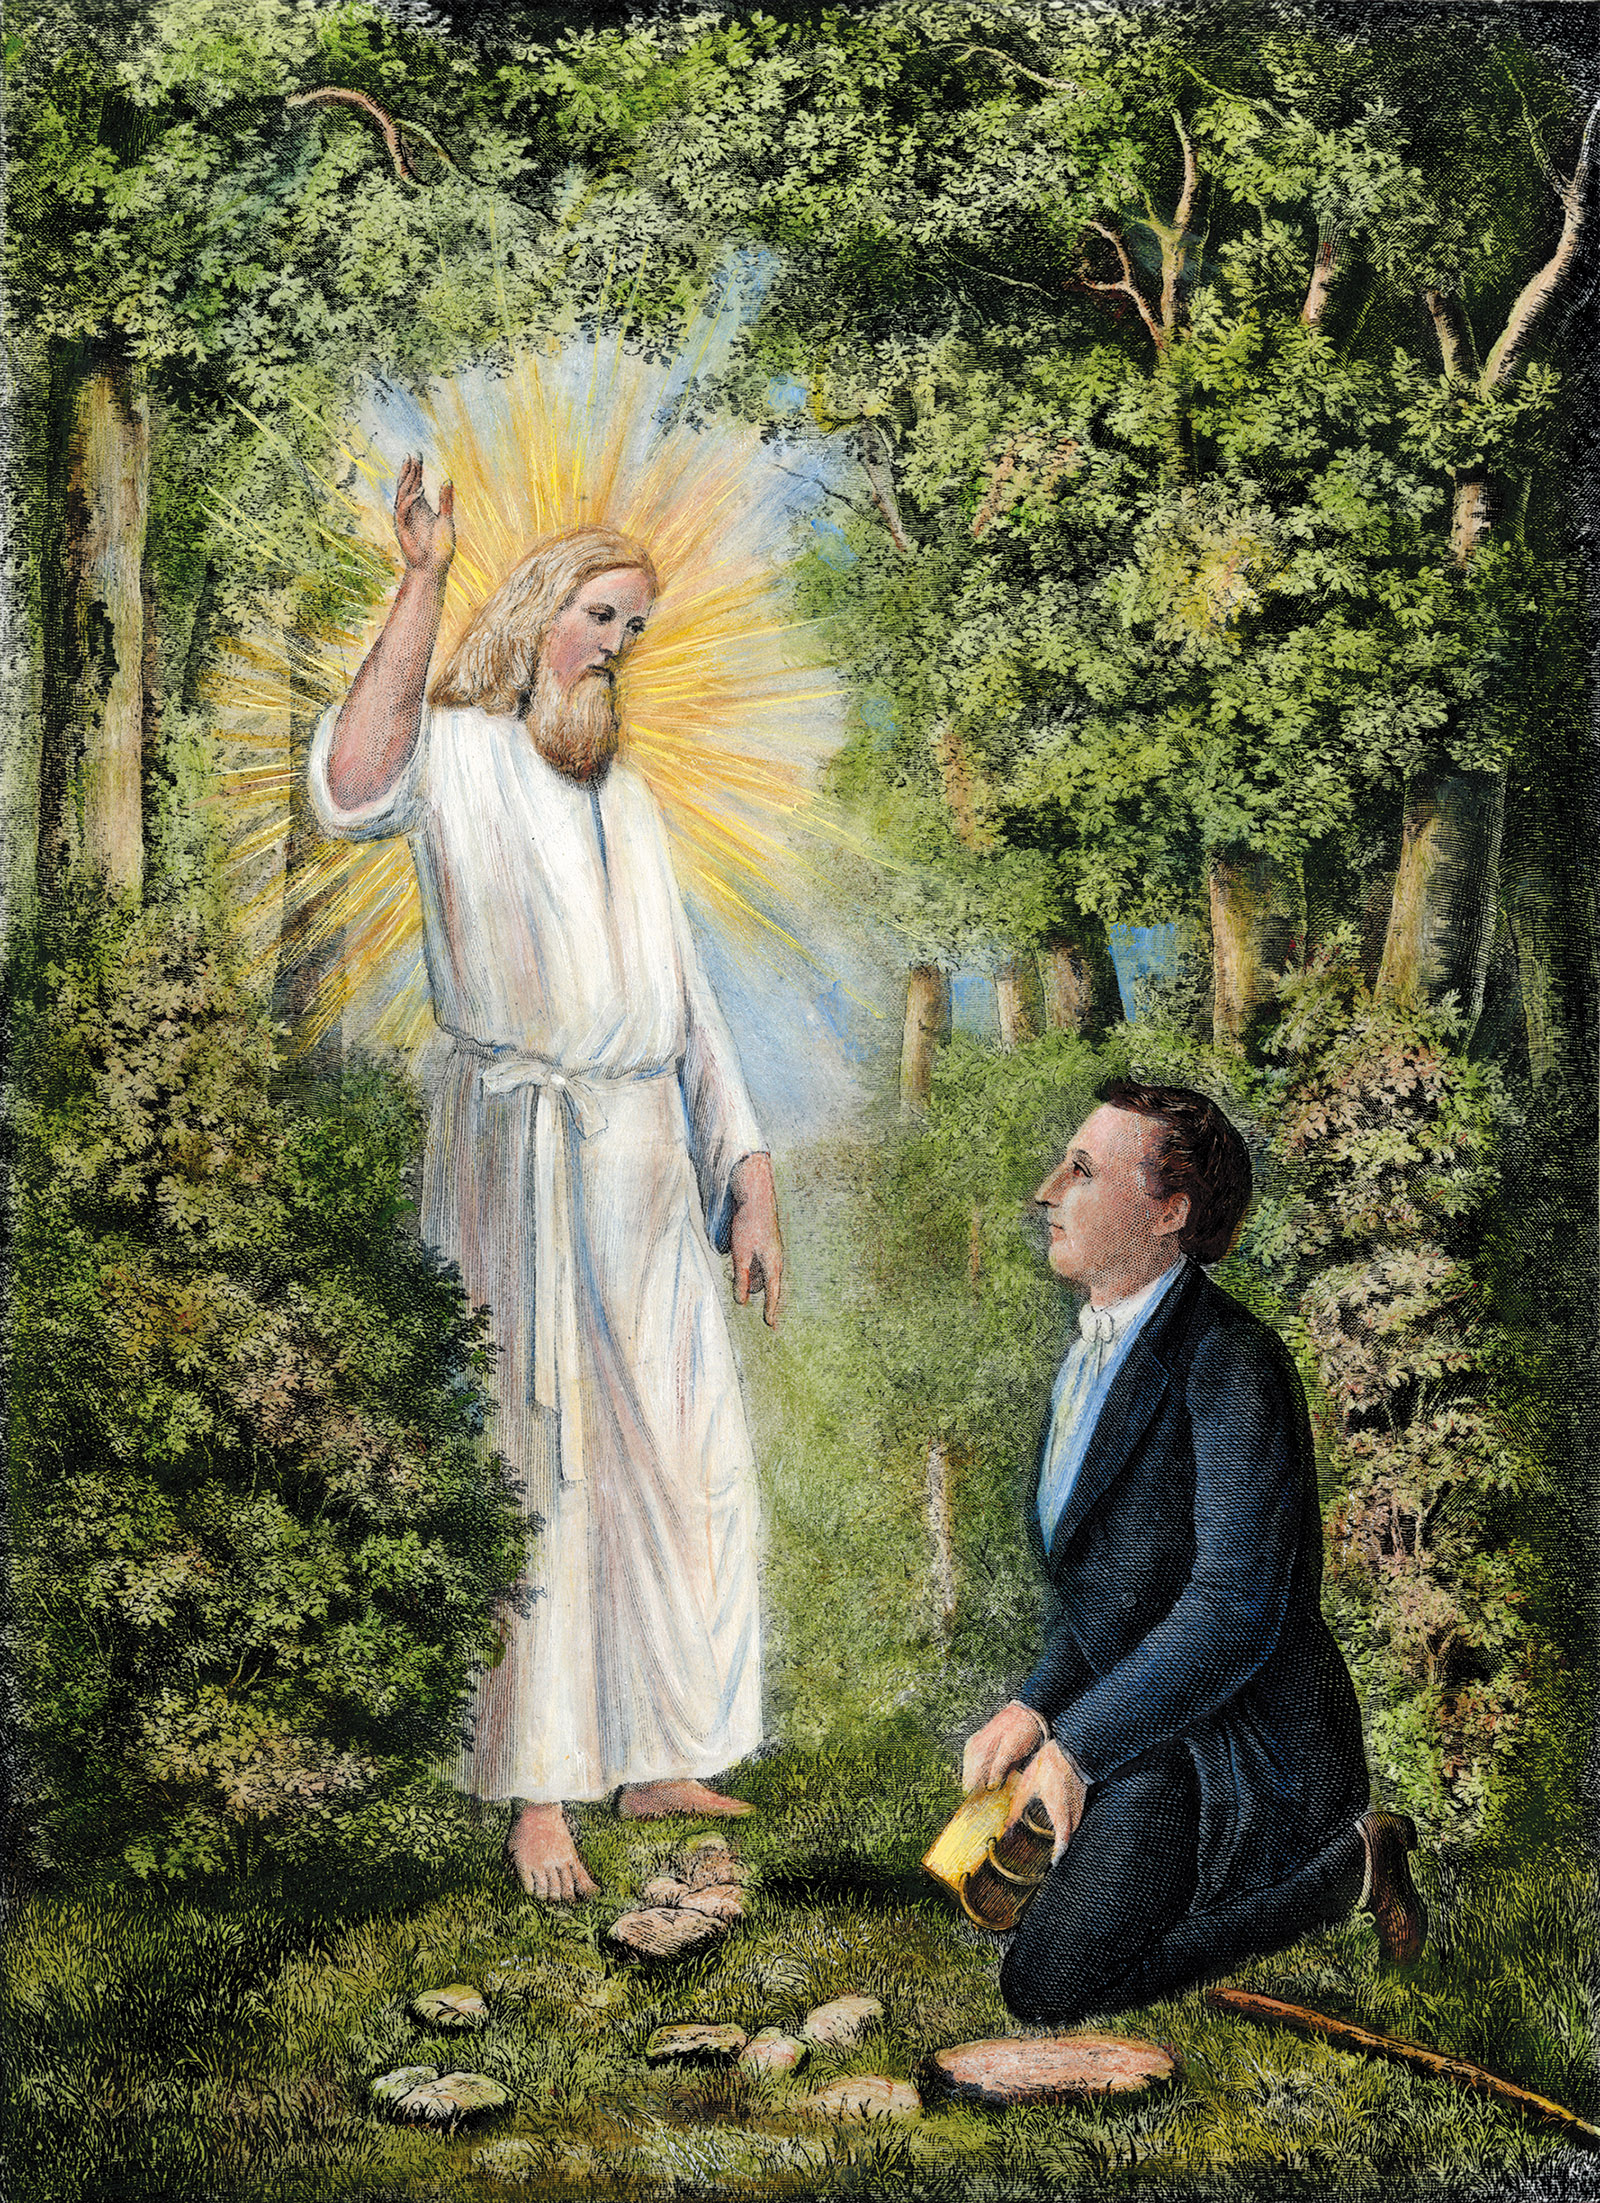 A lithograph depicting the angel Moroni delivering the golden plates of the Book of Mormon to Joseph Smith in western New York, 1827